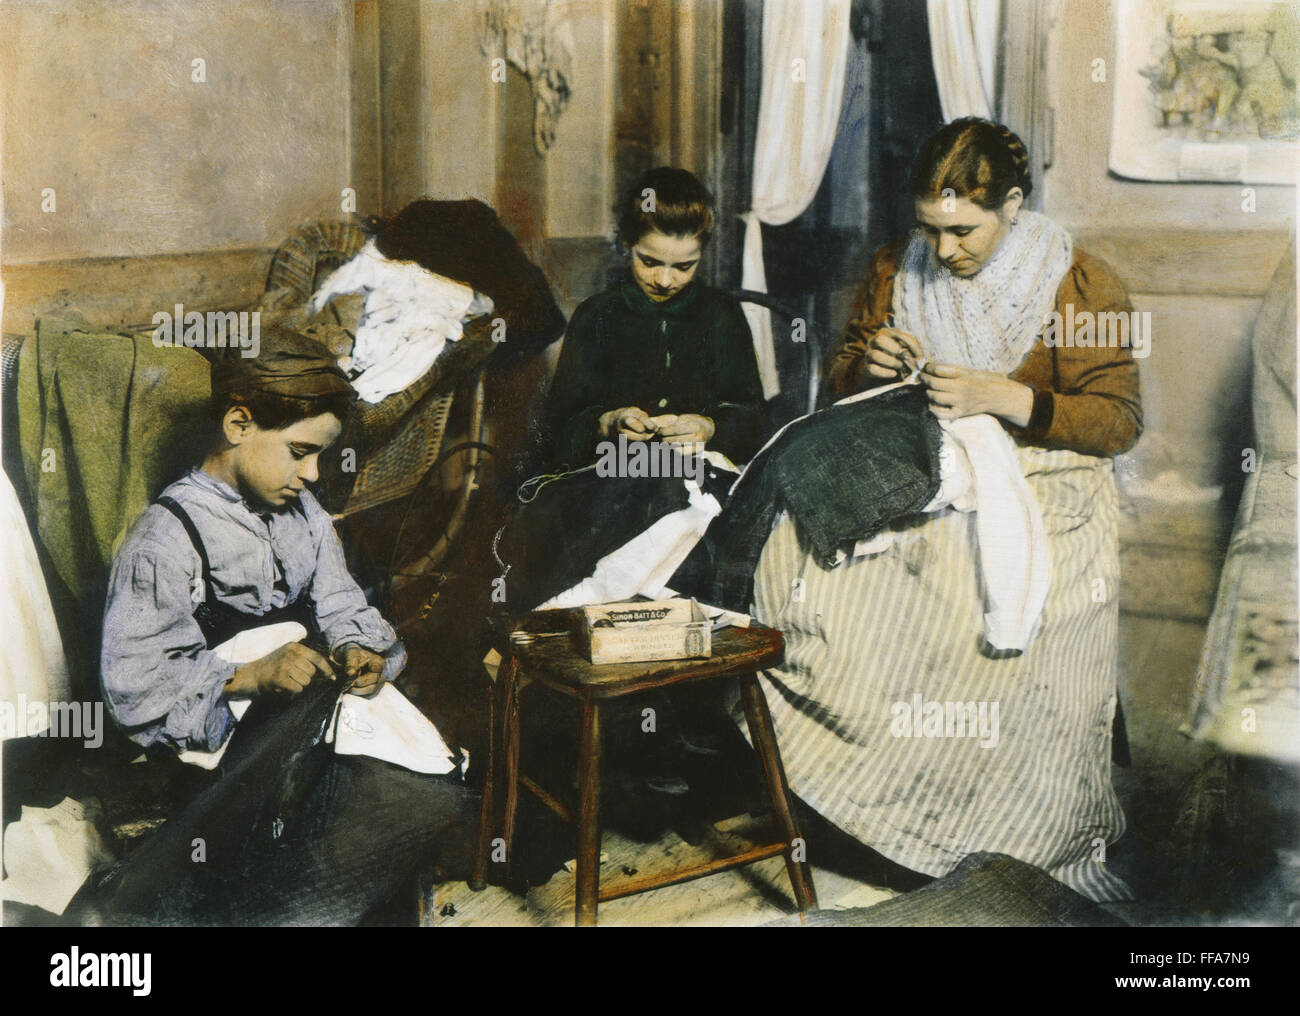 IMMIGRANTS FAMILY LABOR. /nAn immigrant family making men's trousers in their New York City tenement home. Oil over a photograph, c1910, by Lewis W. Hine. Stock Photo